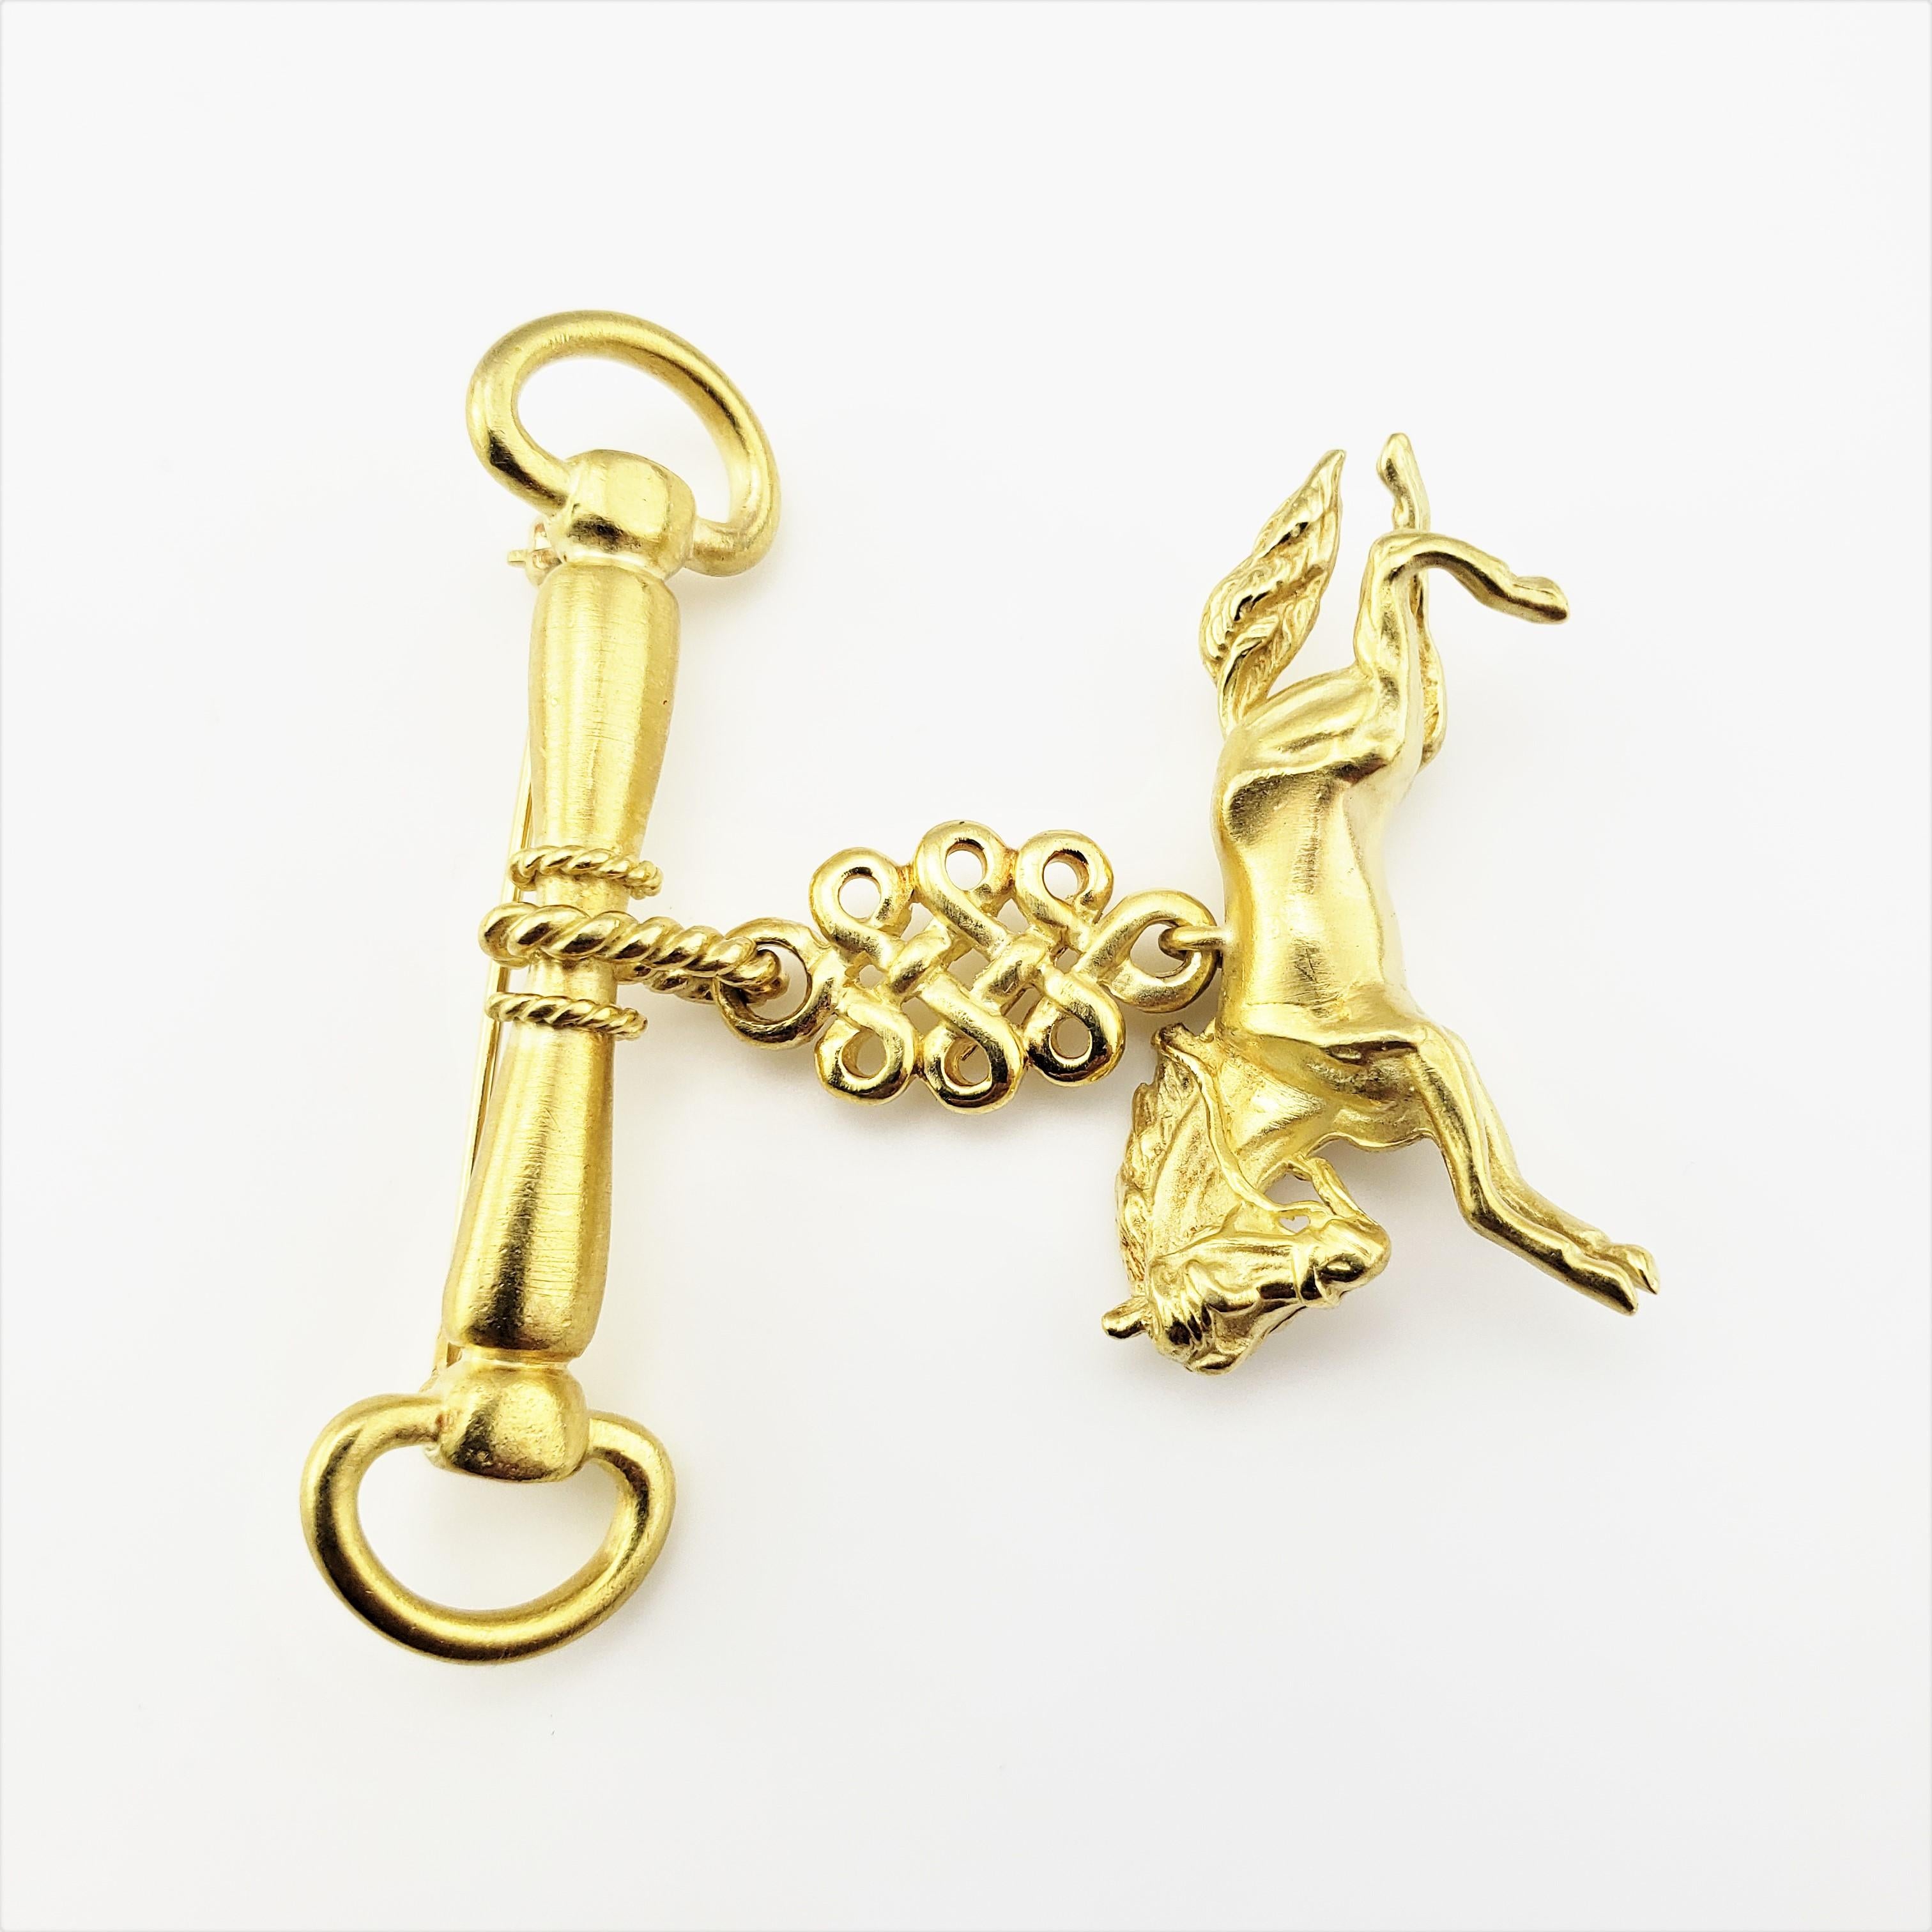 Vintage 18 Karat Yellow Gold Horse Brooch/Pin-

This spectacular brooch features a proud stallion in motion (19 mm x 35 mm) suspended from a beautifully crafted horse bit bar pin. Beautifully detailed in 18K yellow gold.

Size: 50 mm x 43